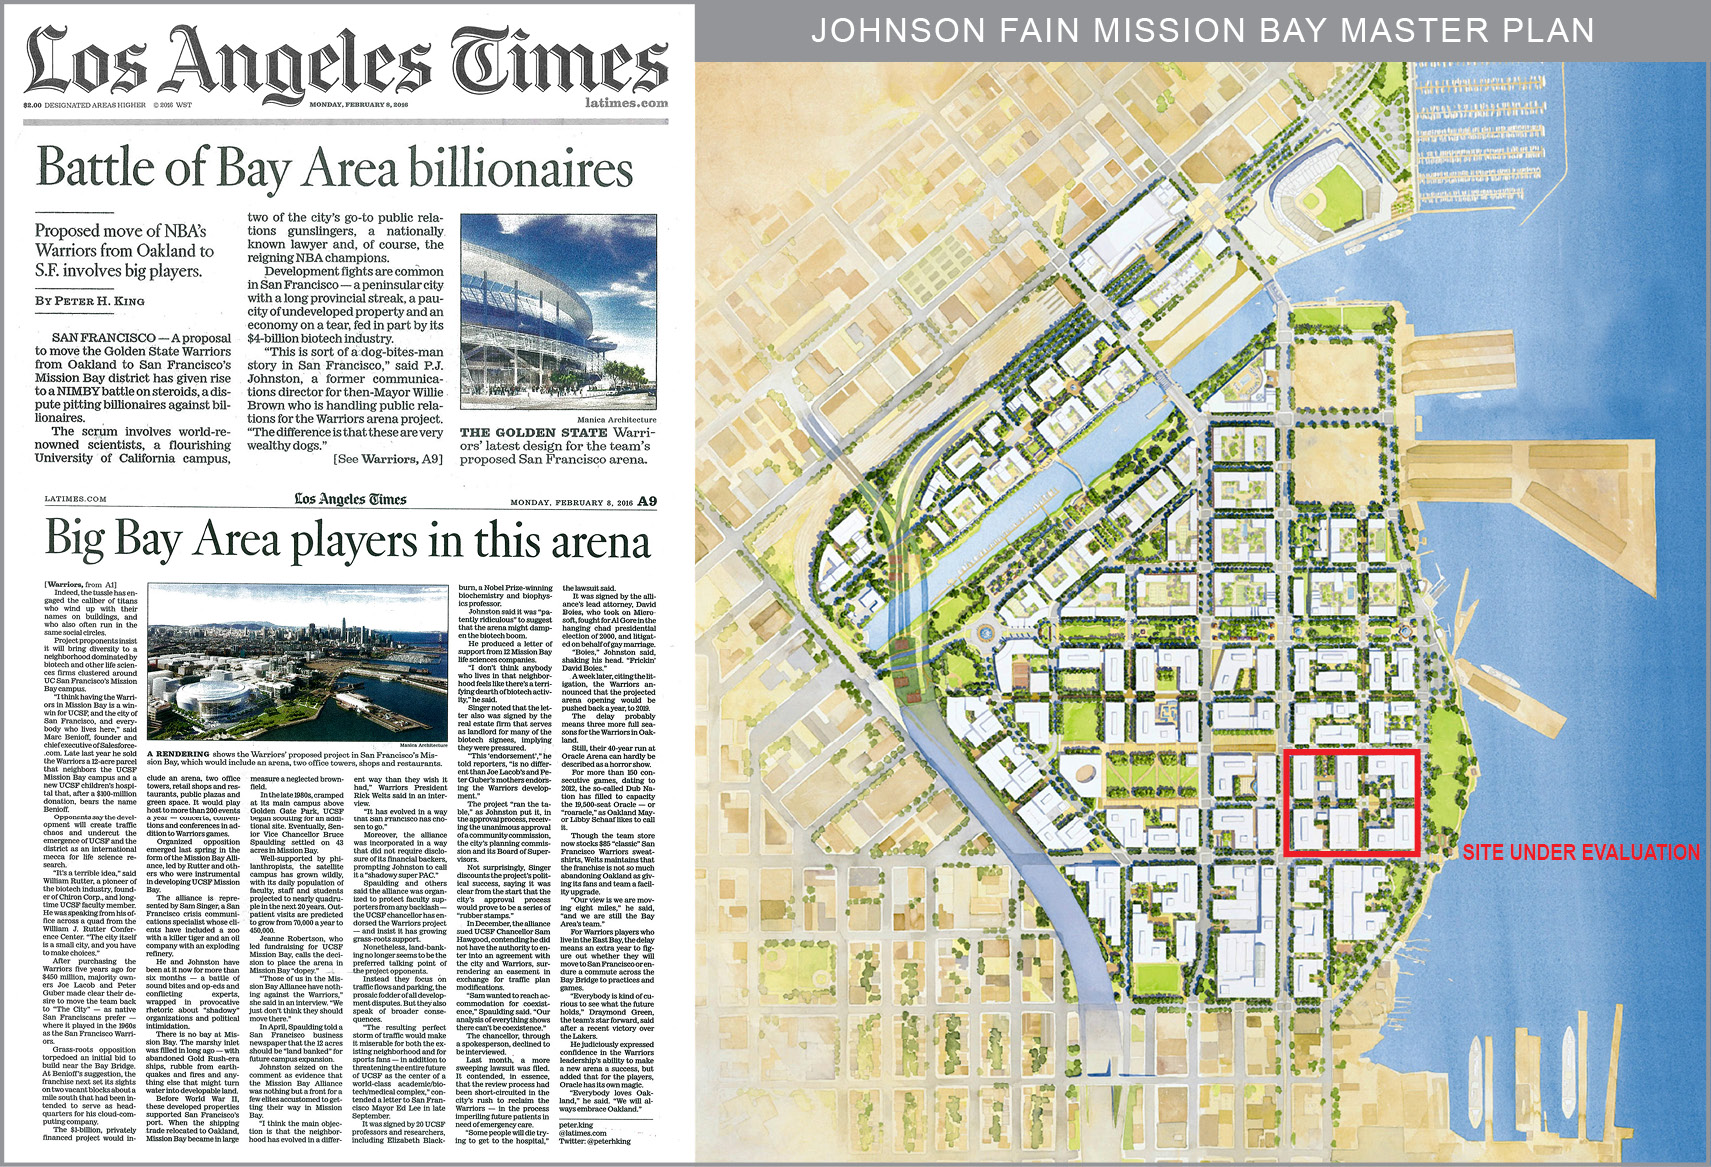 Mission Bay Master Plan in the News